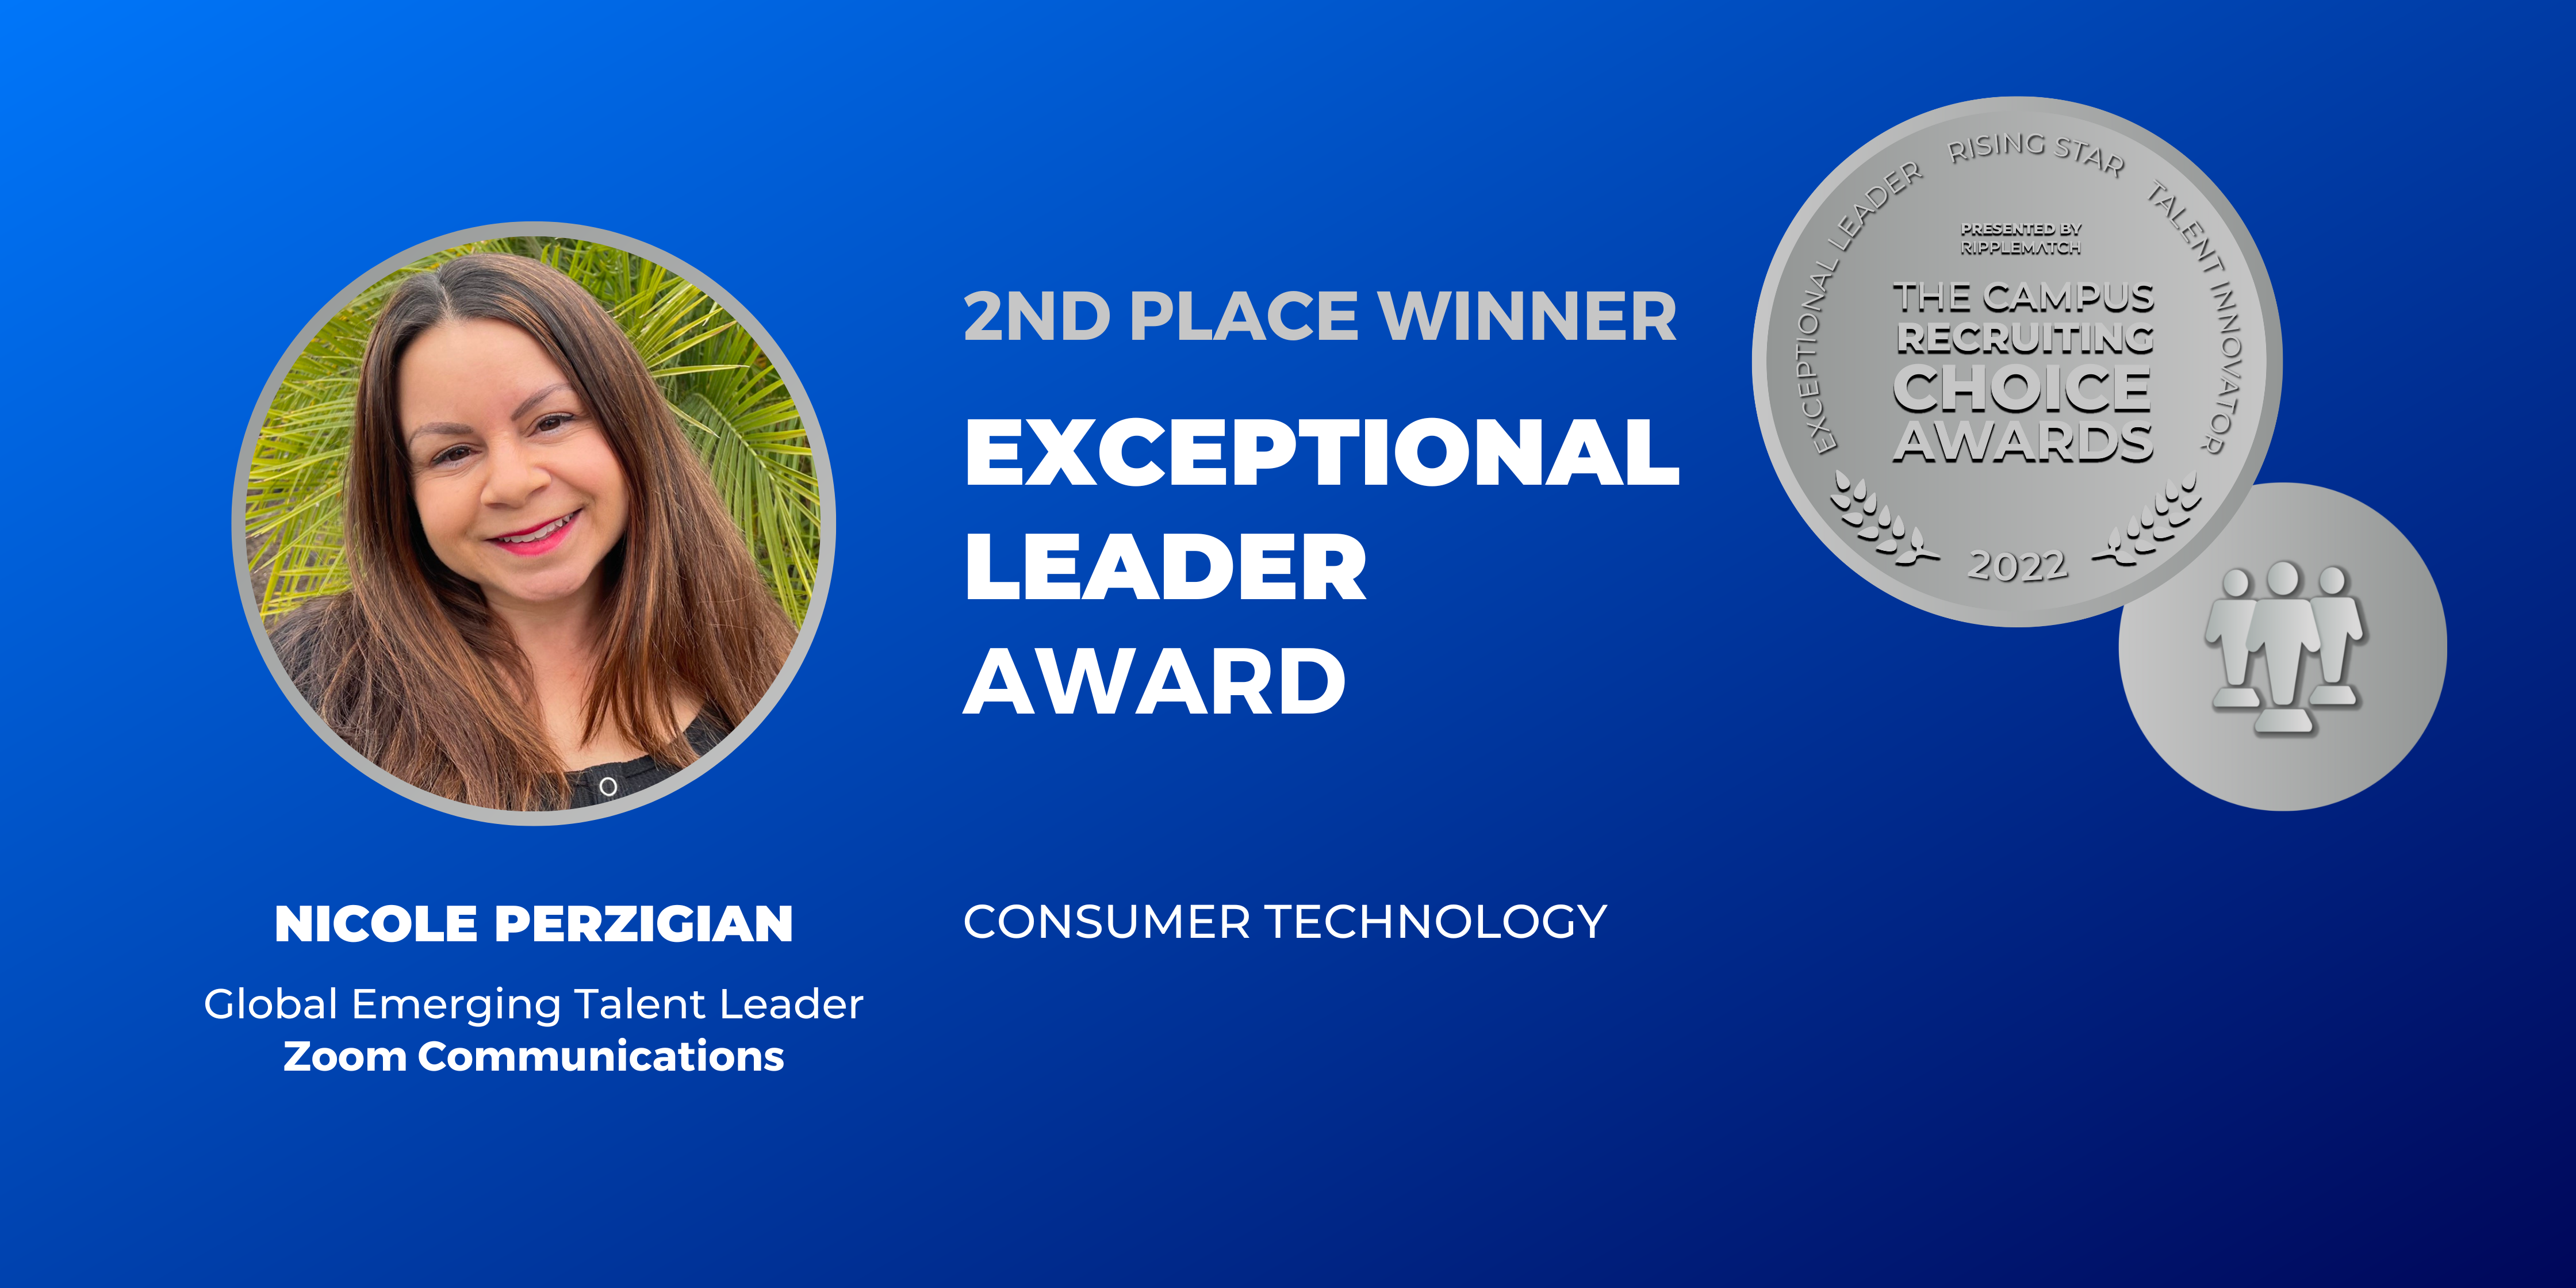 EXCEPTIONAL LEADER - 2nd place - Consumer Technology - Nicole Perzigian